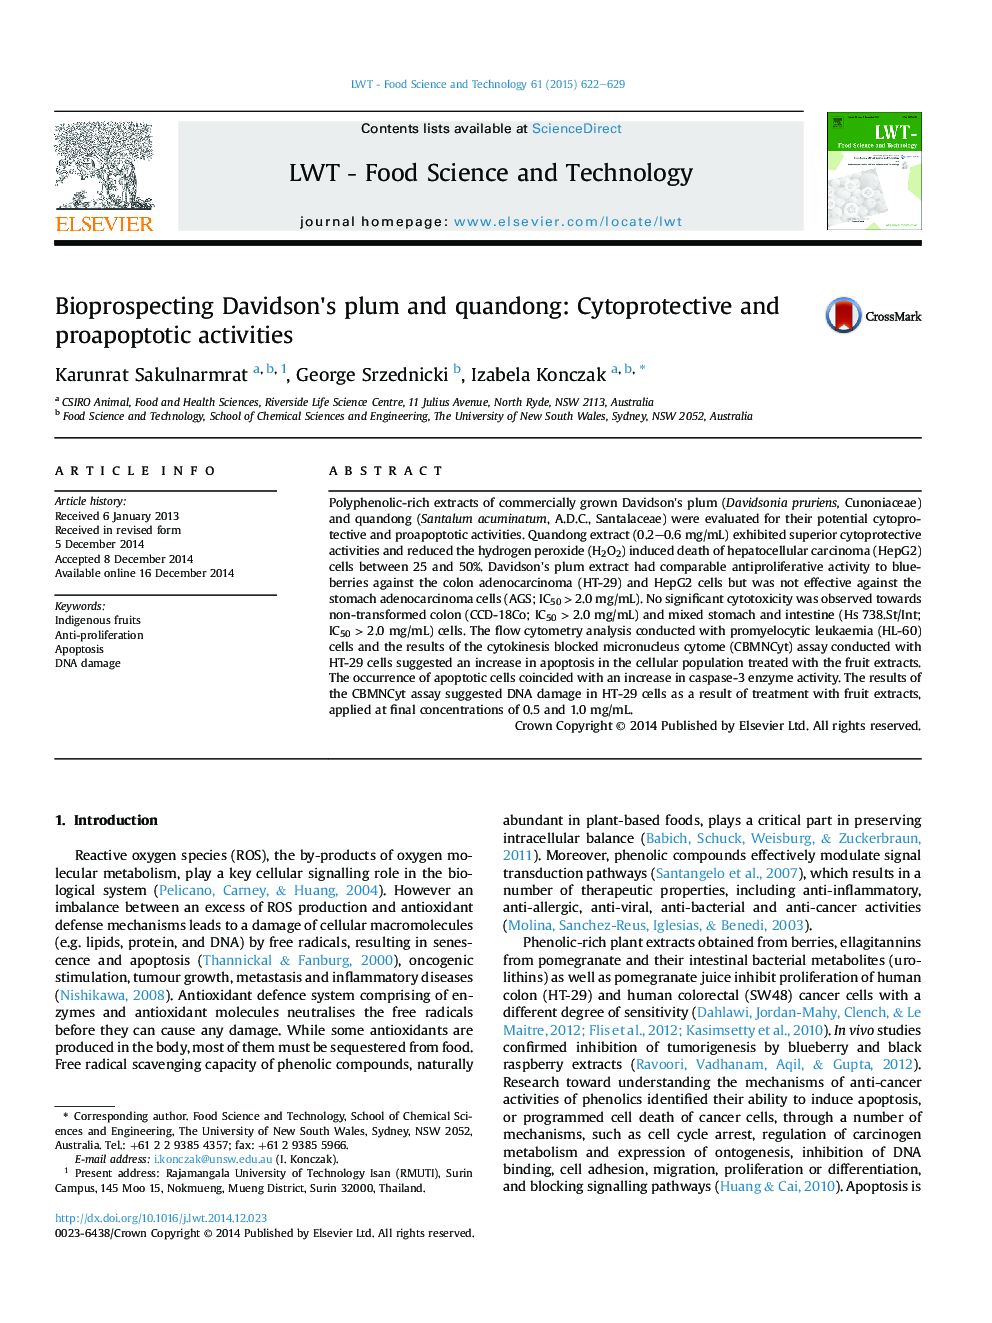 Bioprospecting Davidson's plum and quandong: Cytoprotective and proapoptotic activities